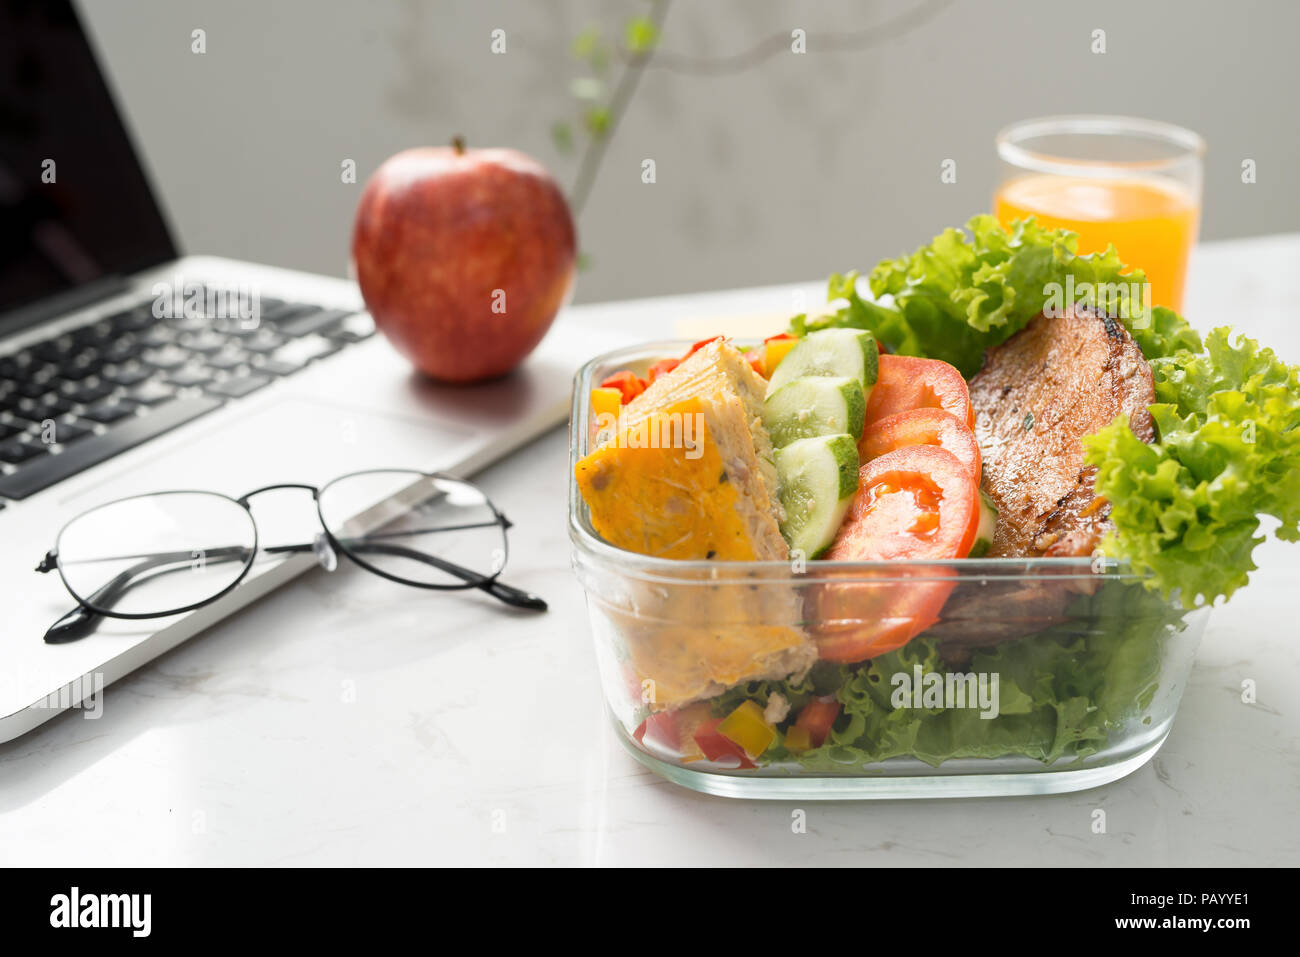 homemade lunch box at modern stylish work place, view from above Stock Photo